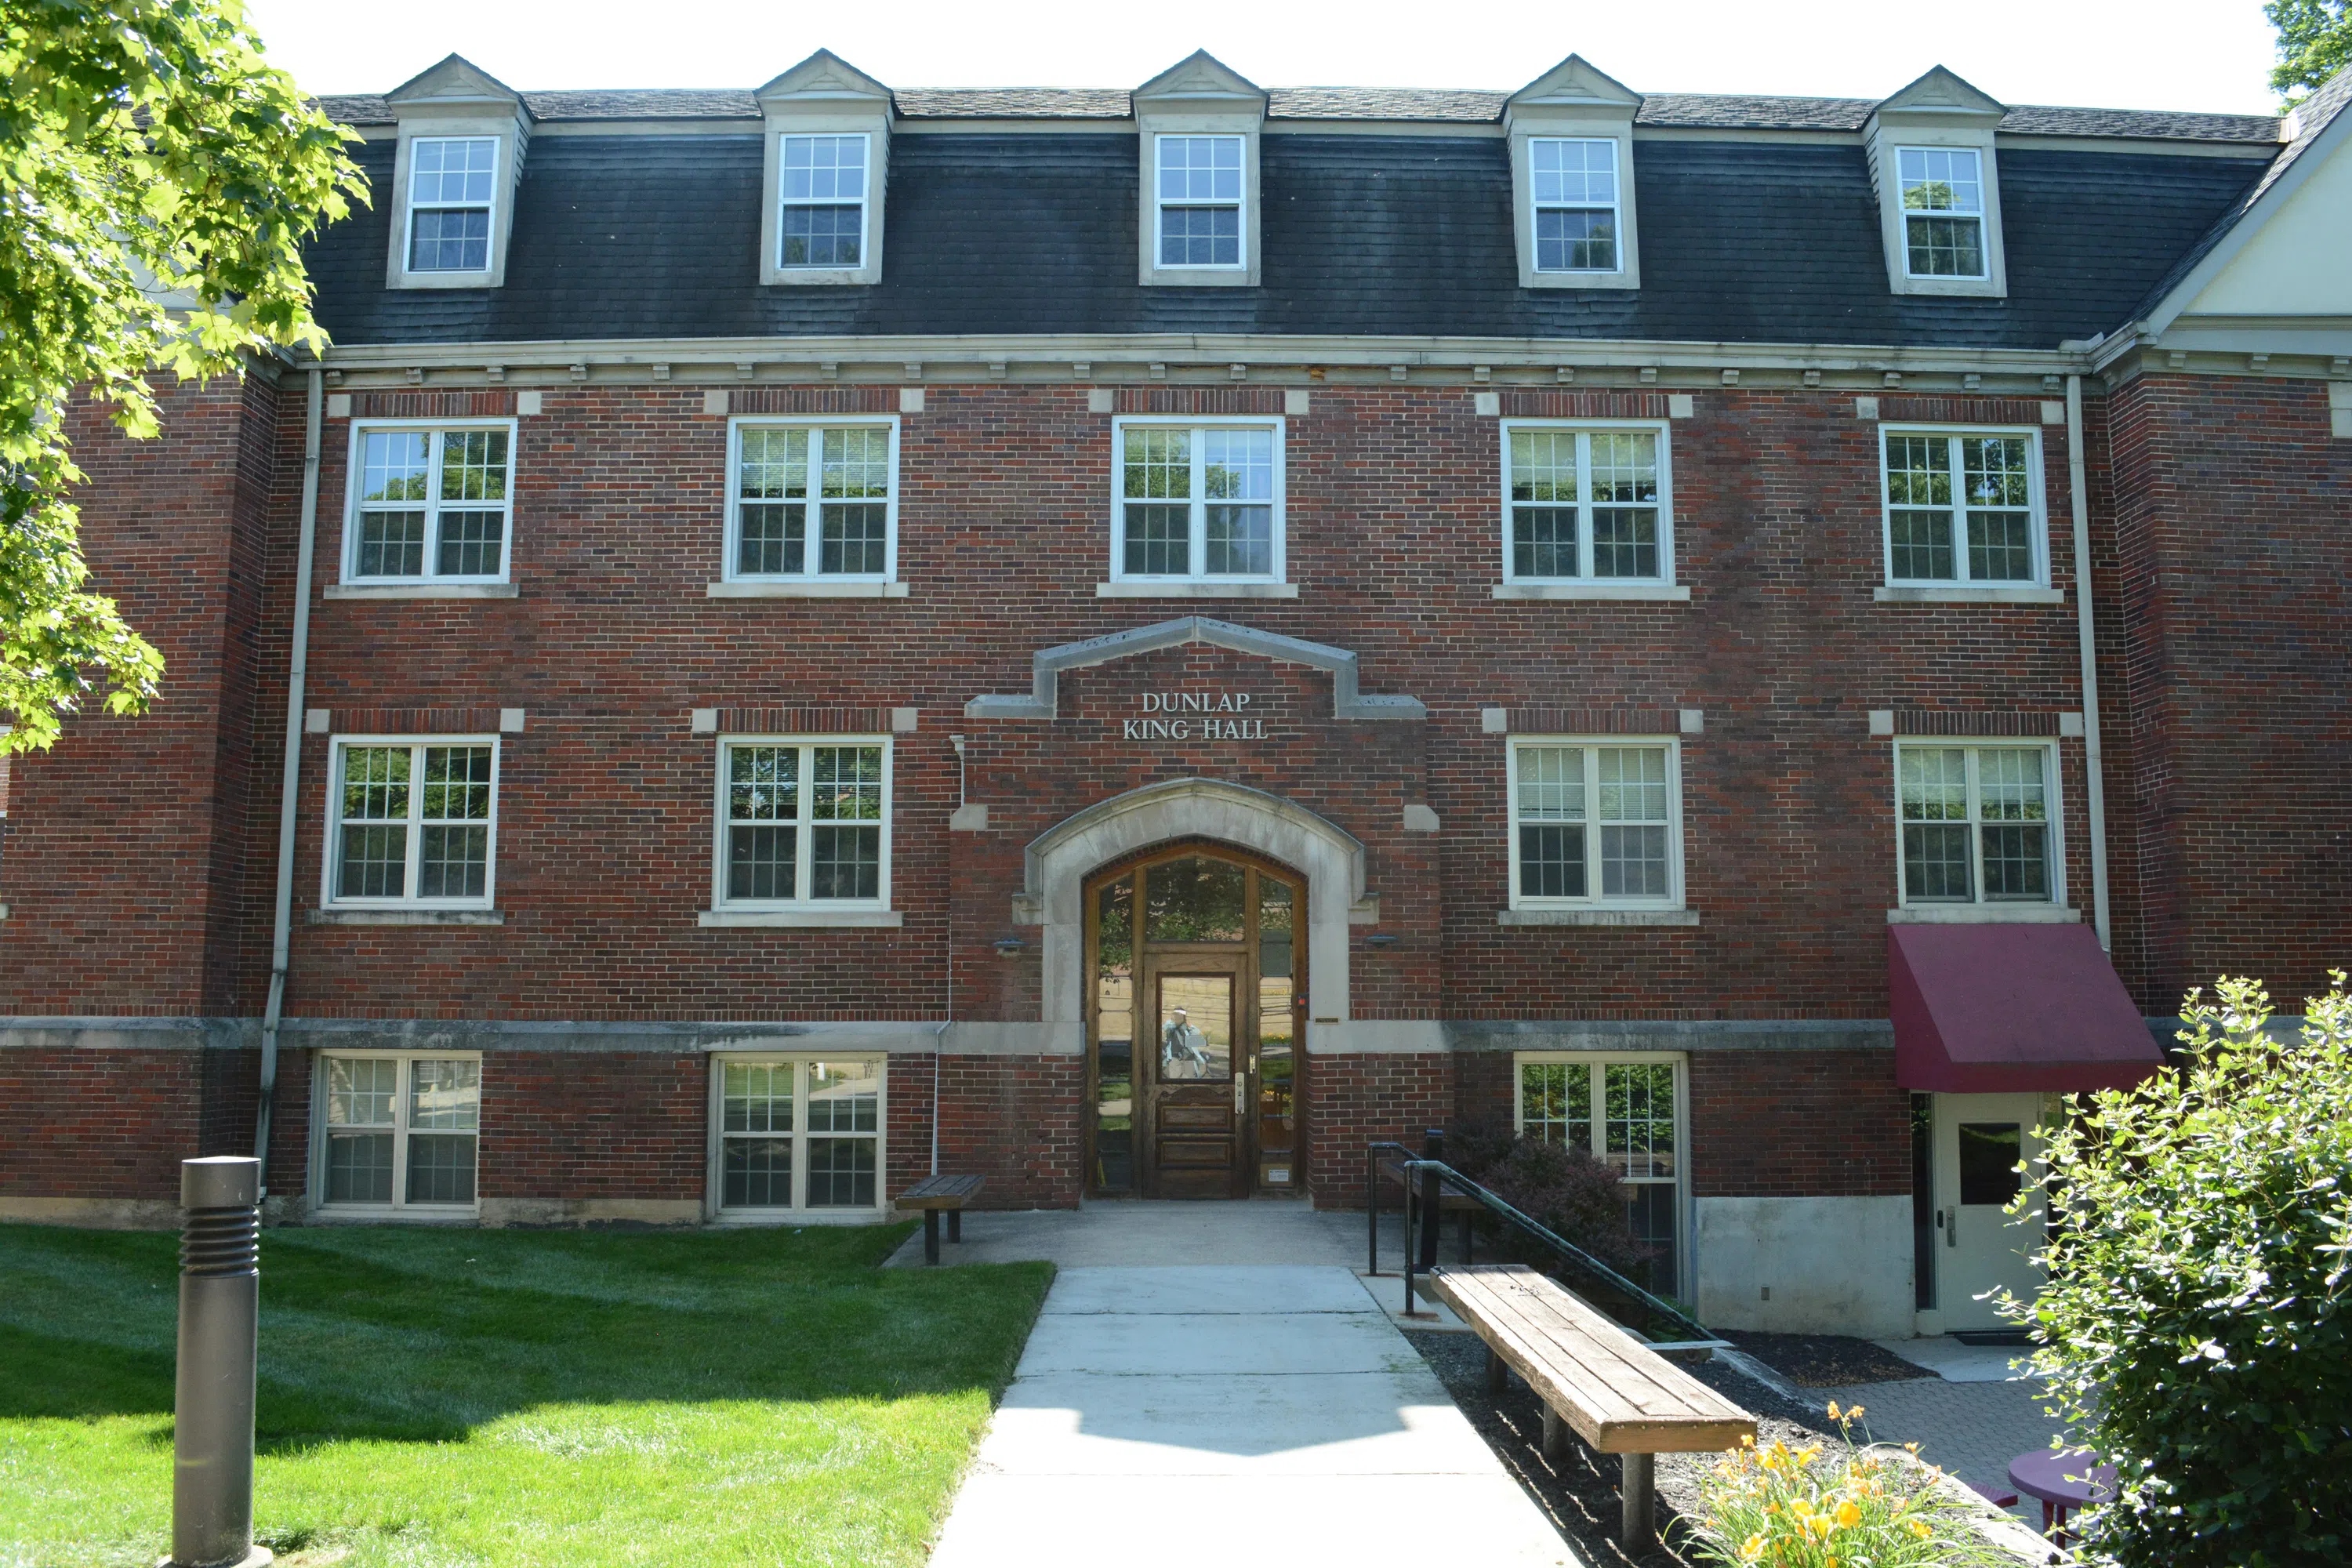 The front facade of Dunlap-King Hall.